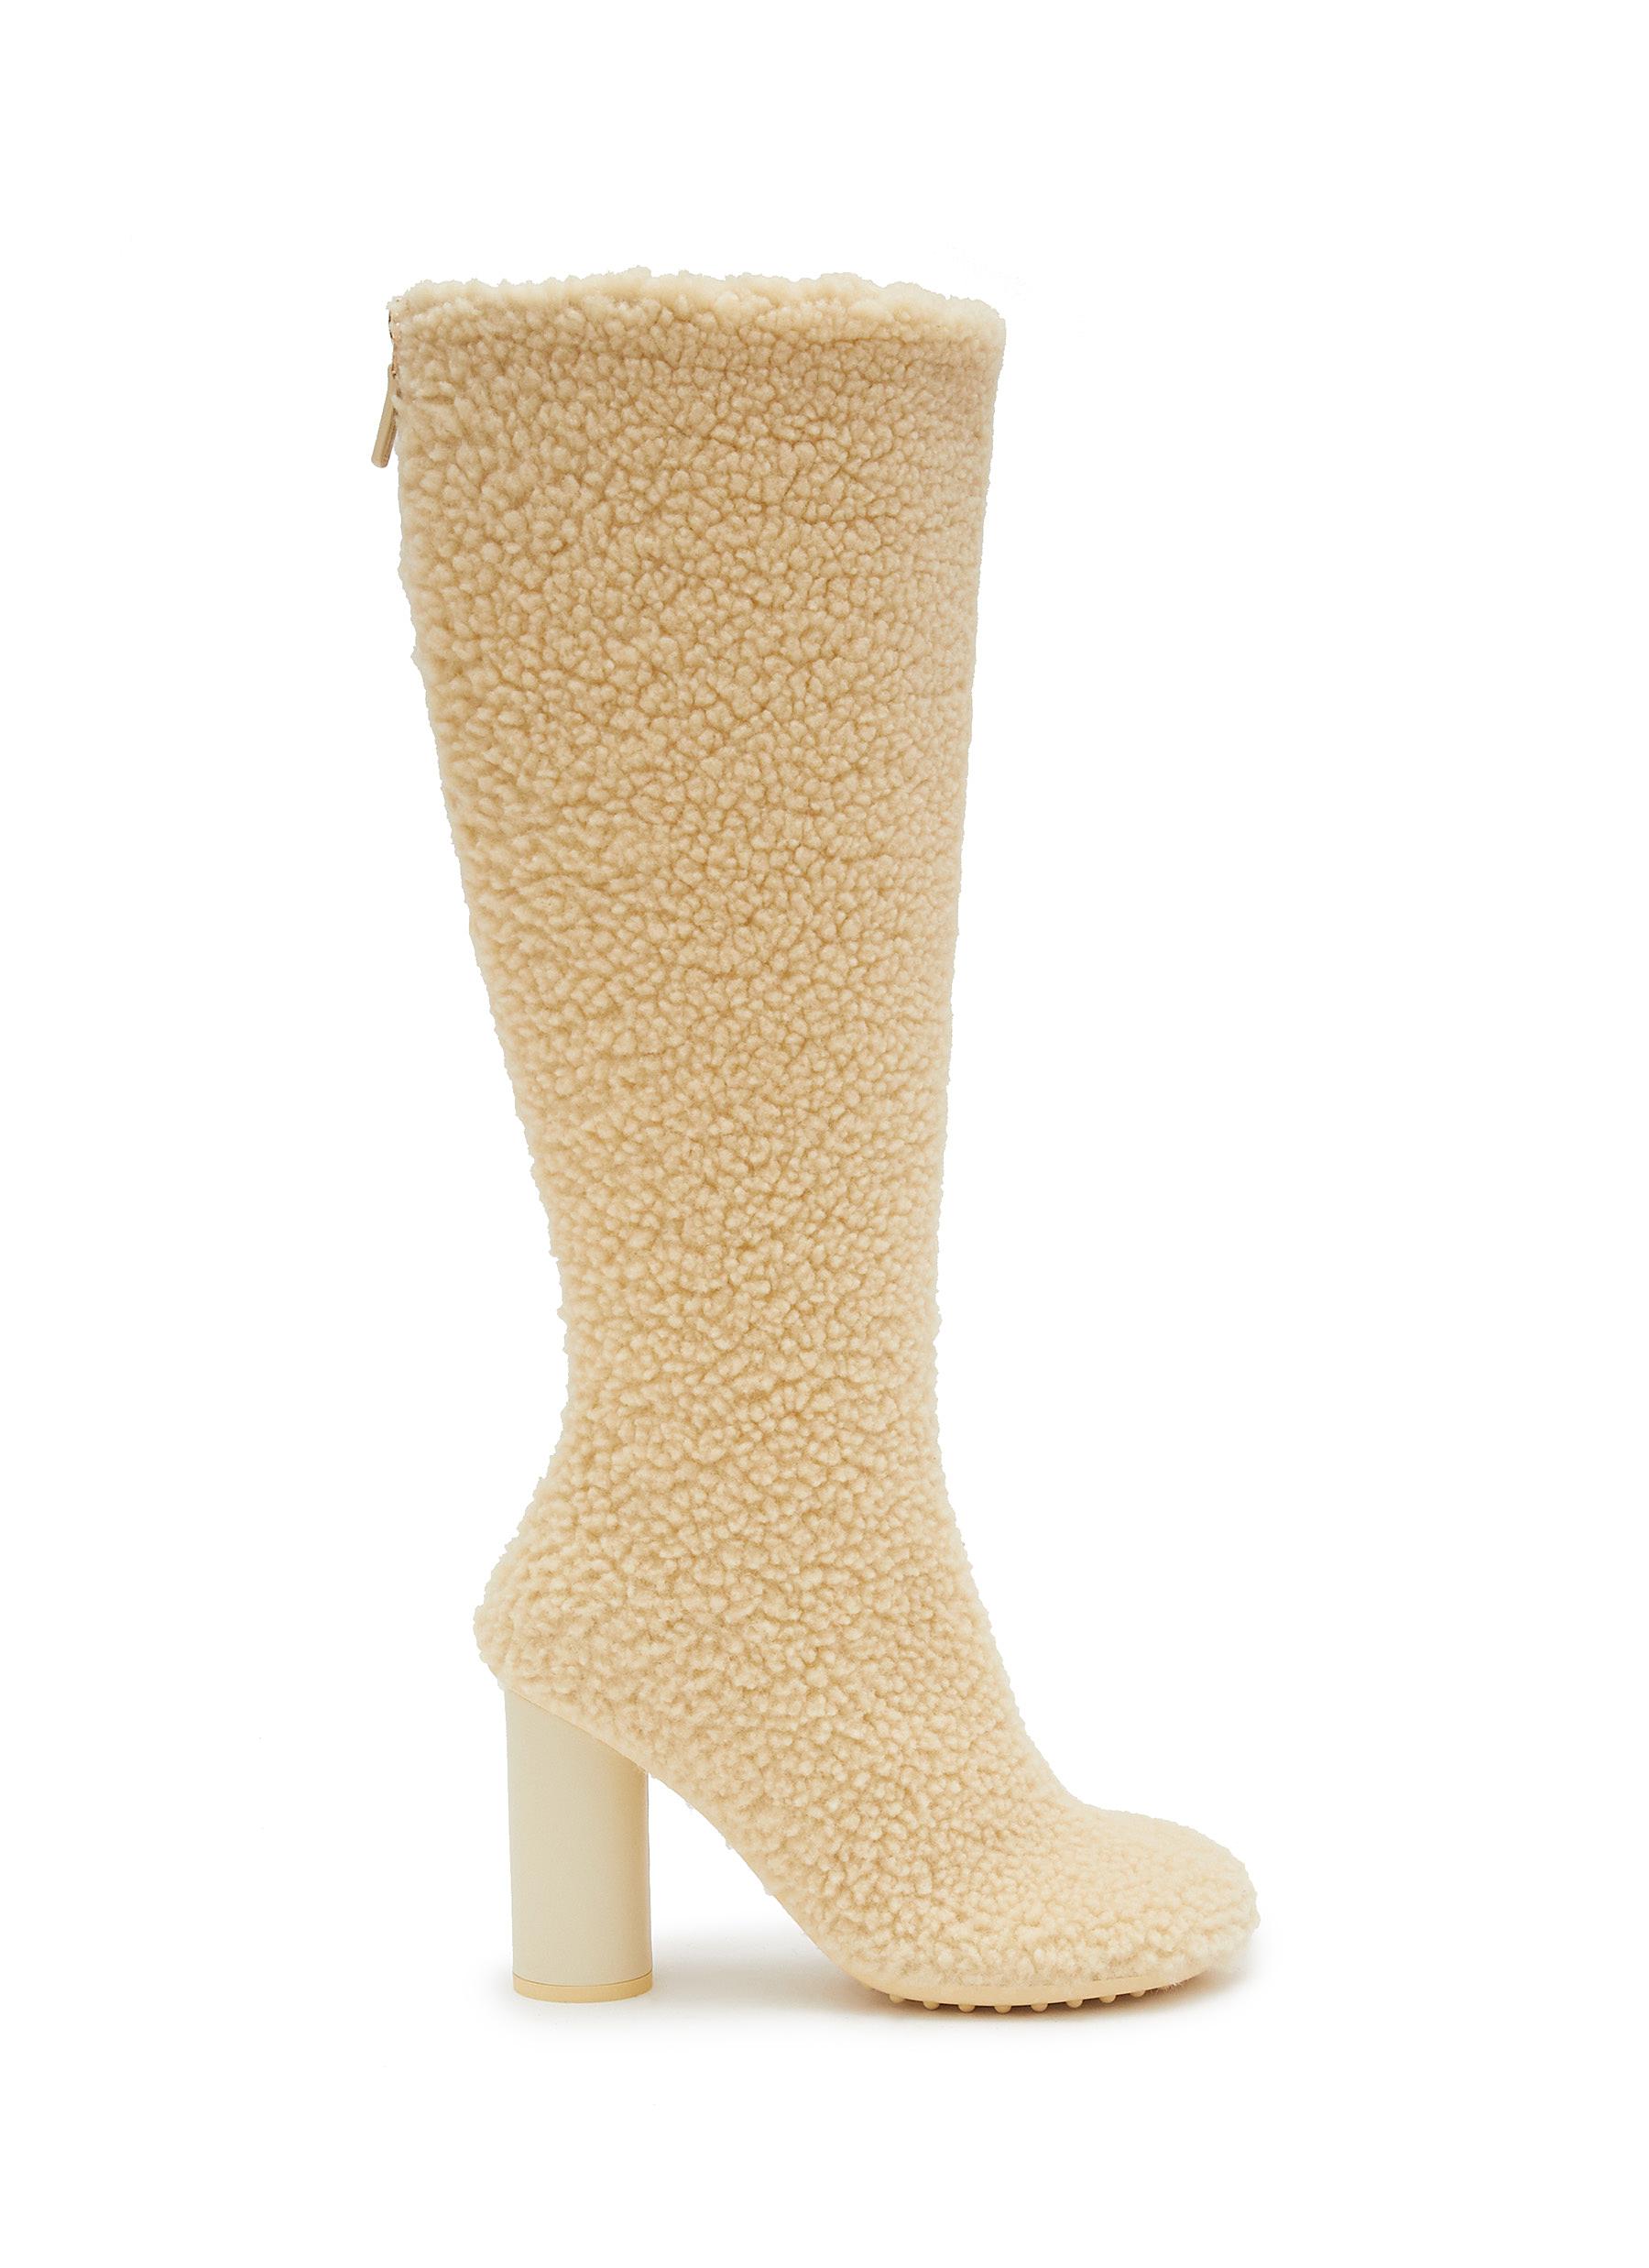 Atomic 90 Shearling Knee High Boots